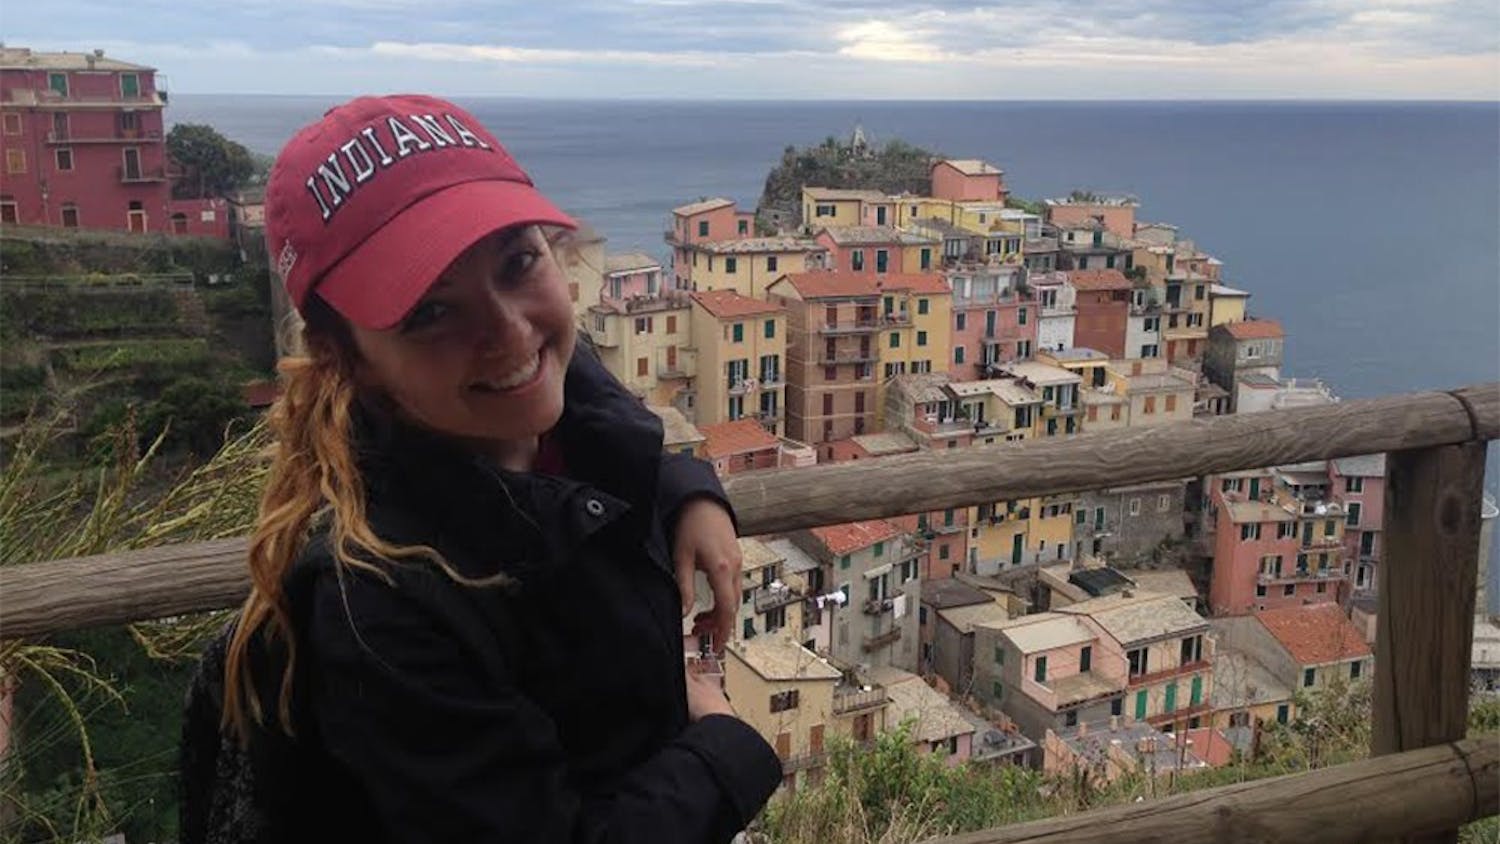 Columnist Lauren Saxe takes a break from life in Spain to hike the Cinque Terre, which means "Five Lands," in Italy. Here she begins her tour in Manarola, the first of the five towns along the coast.